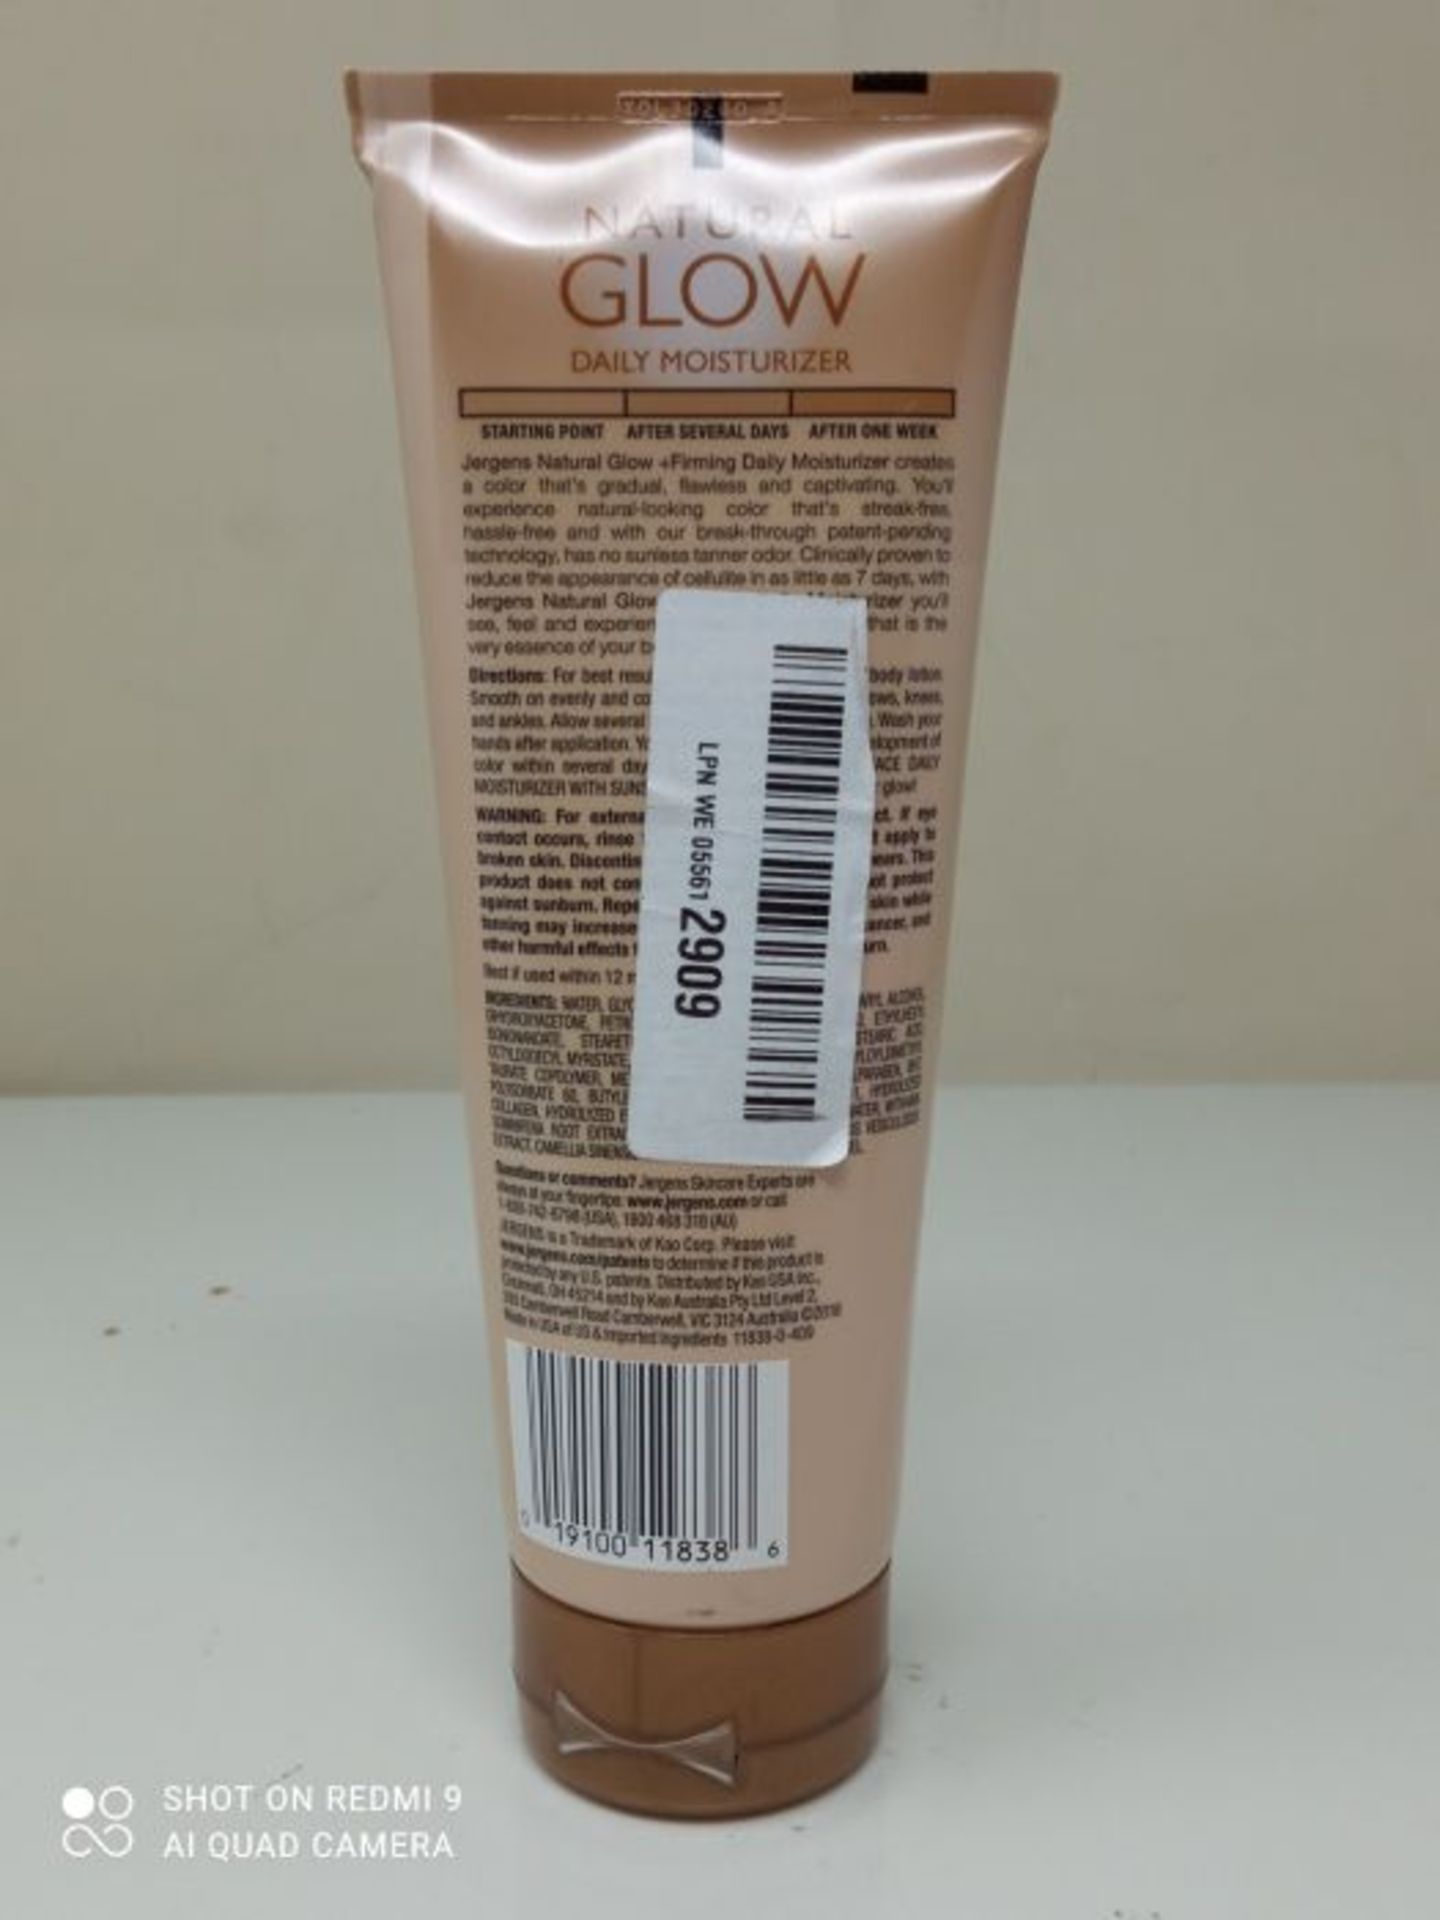 Jergens Natural Glow +FIRMING Daily Moisturizer for Body, Medium to Tan Skin Tones, 7. - Image 3 of 3